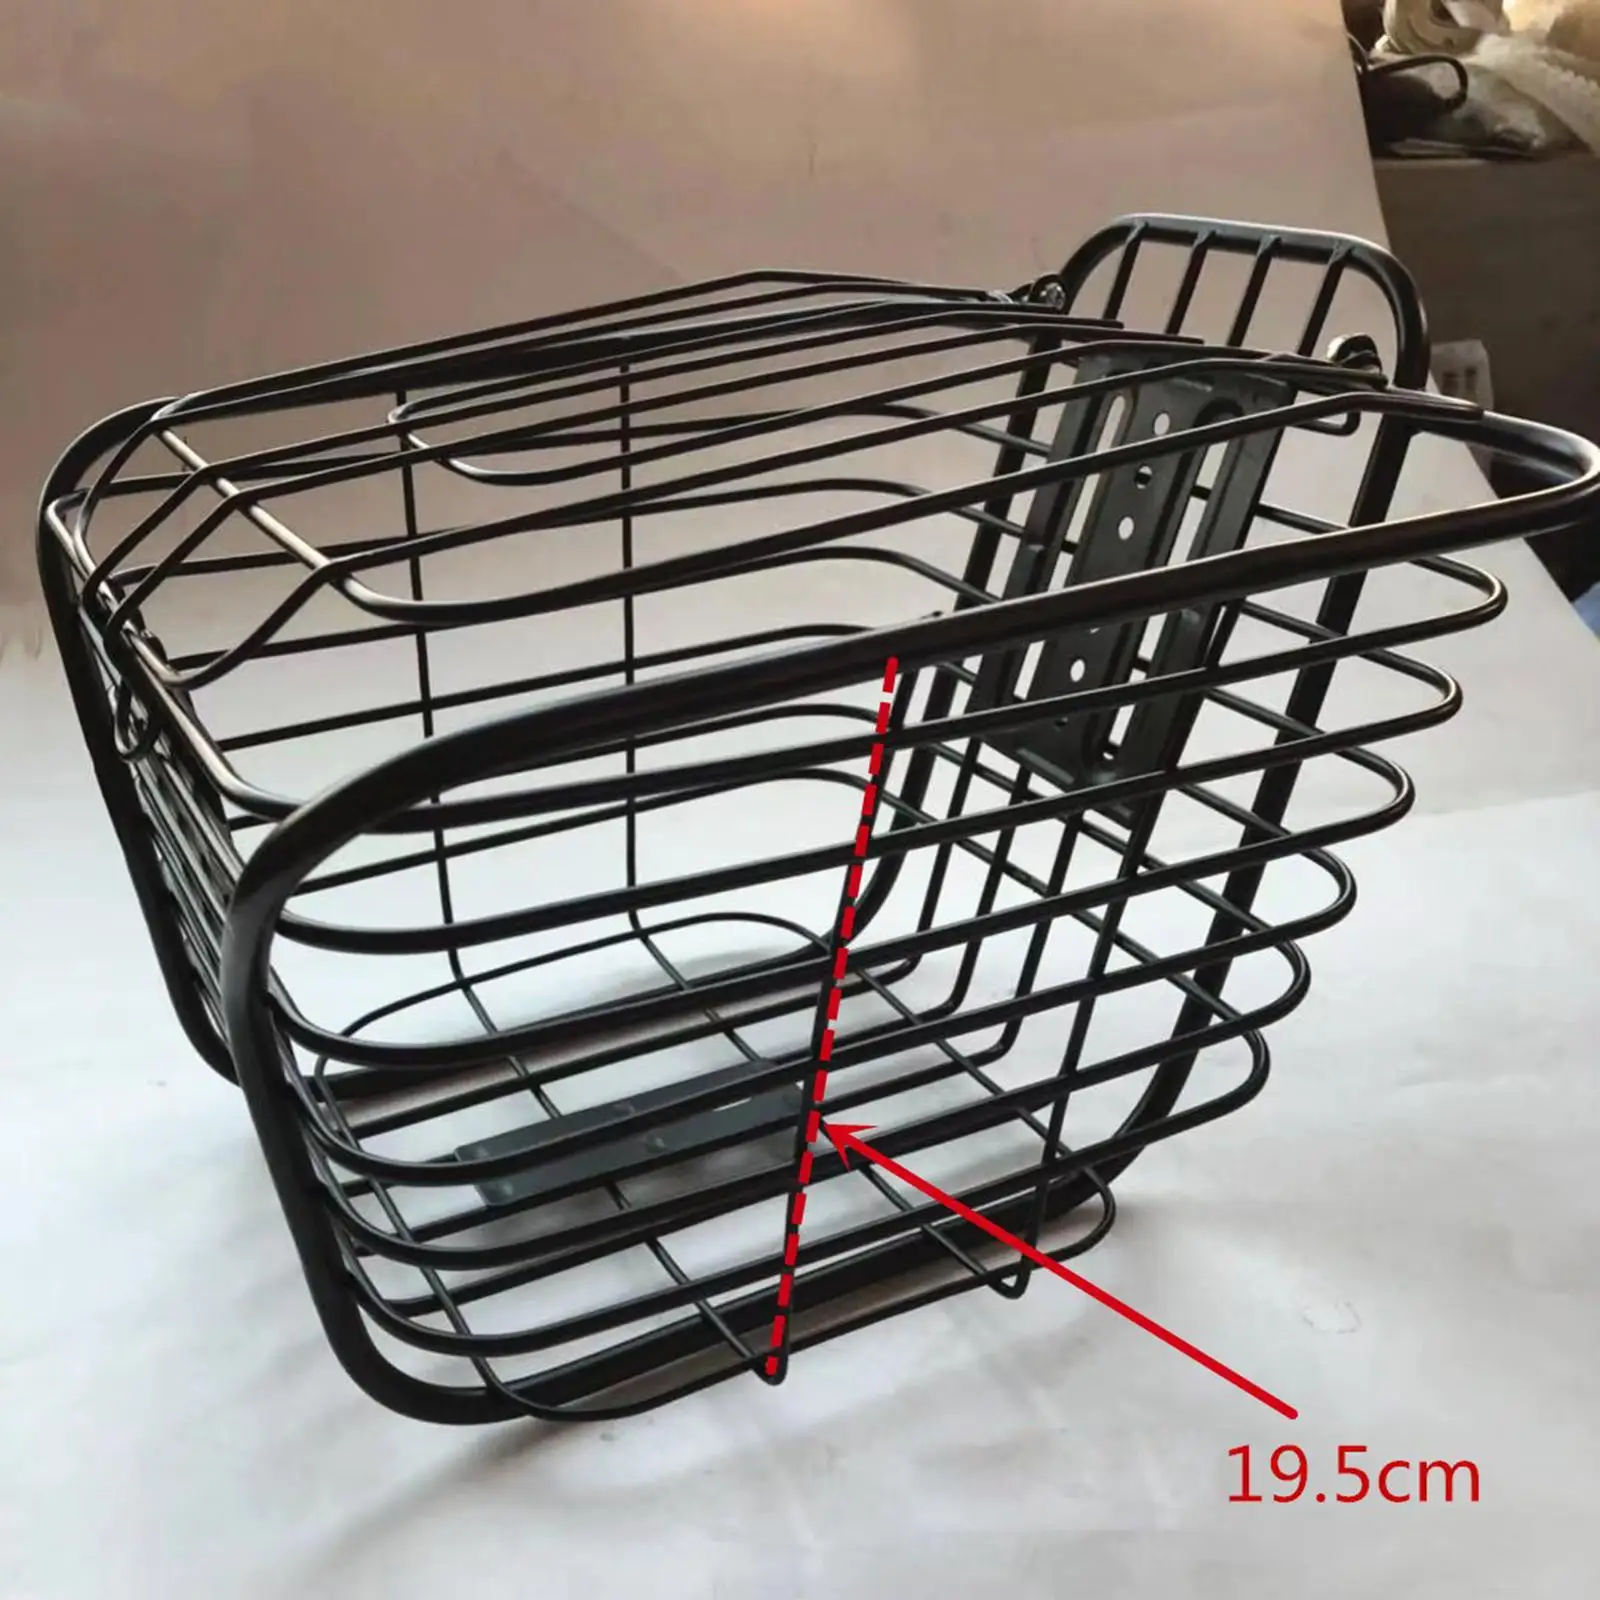 Iron Storage Basket Detachable for Scooter Cycling ,Black Universal